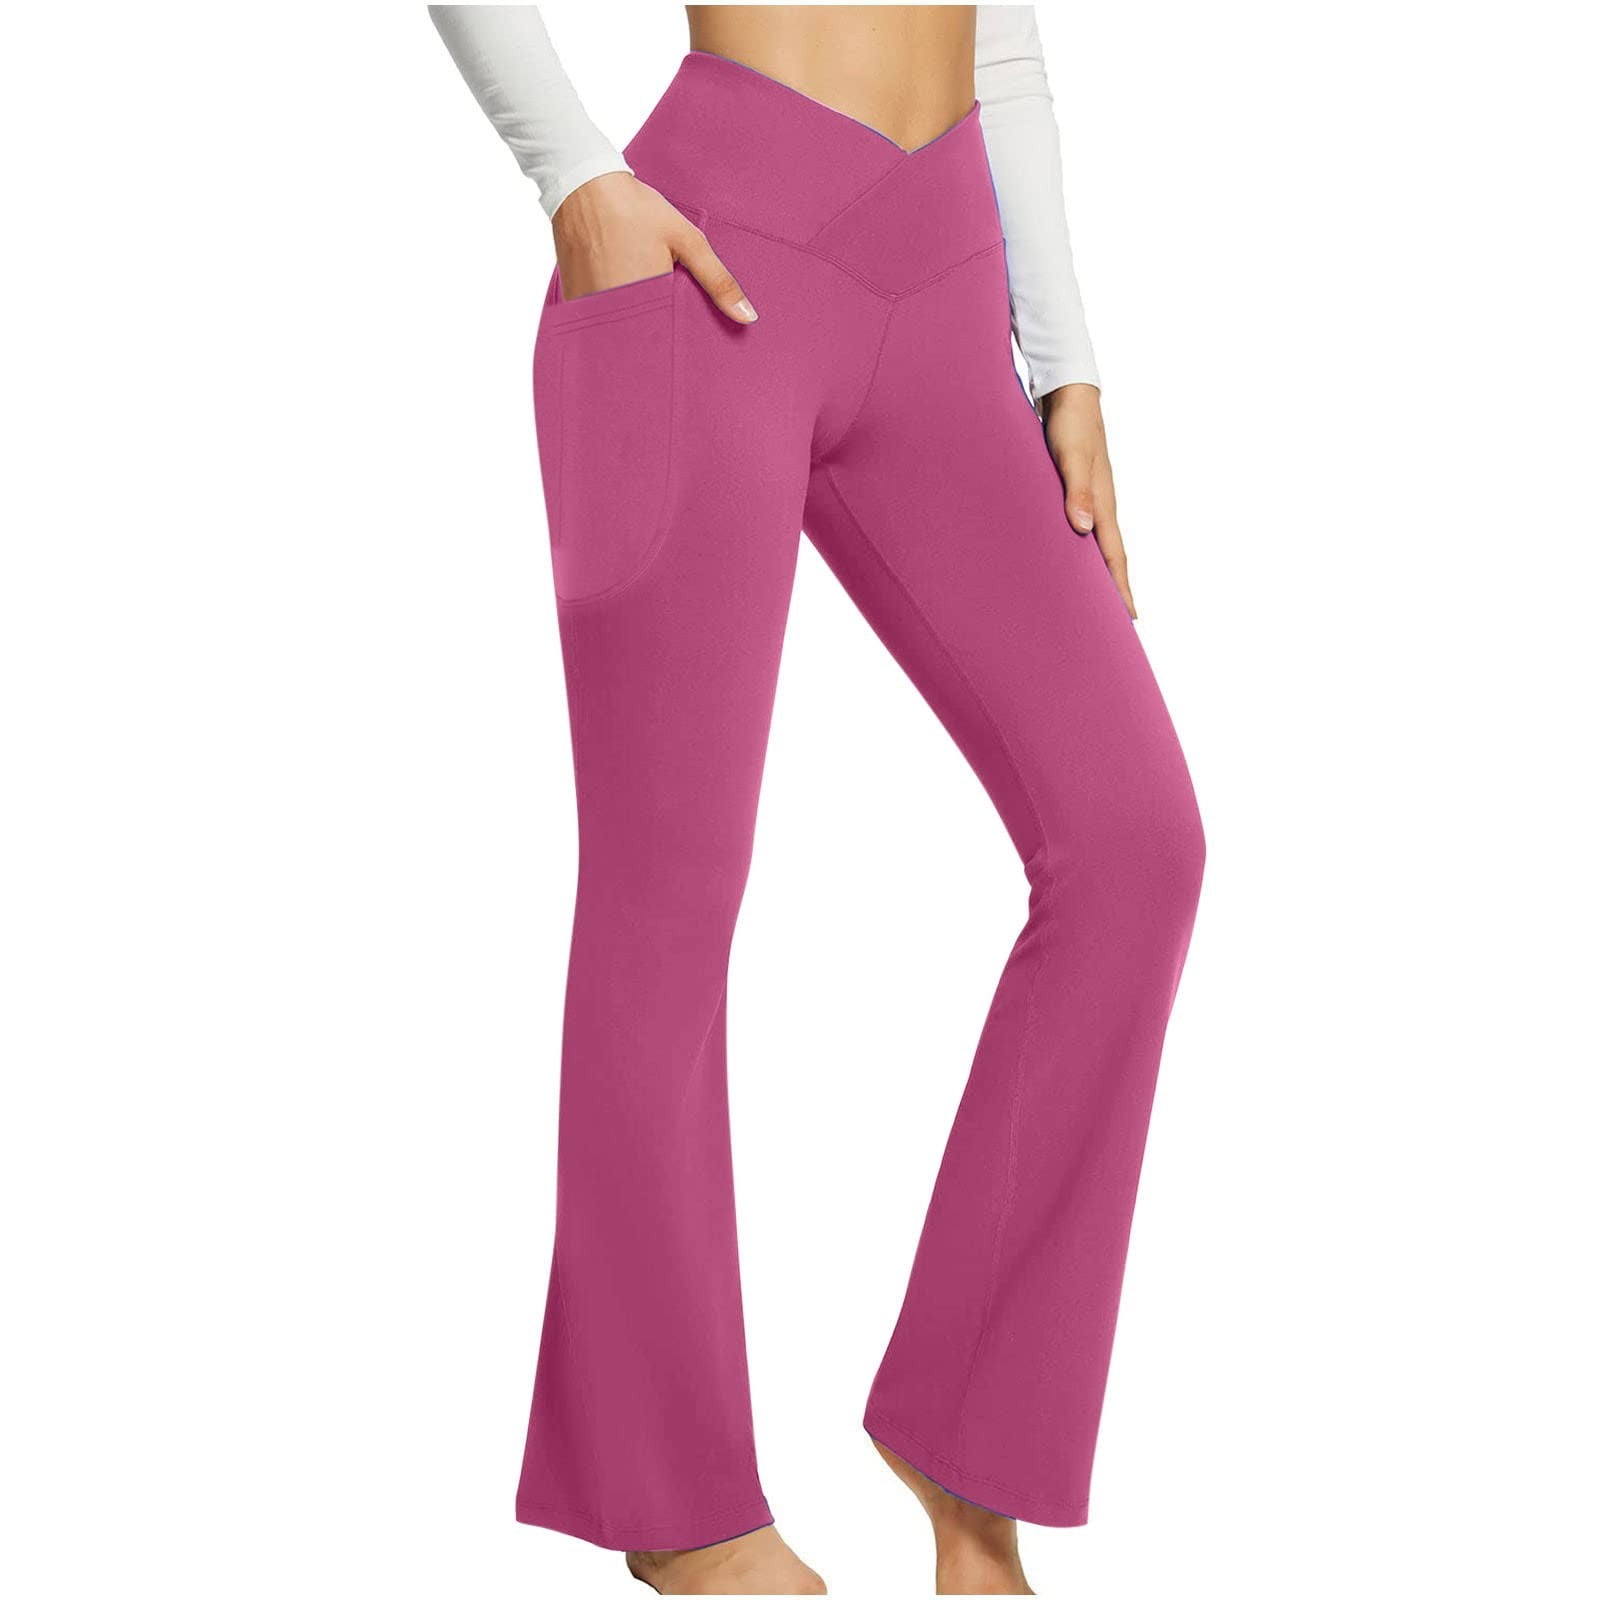 2 Pack Women's Wild Fable High Waisted Flare Yoga Pants Pink Size